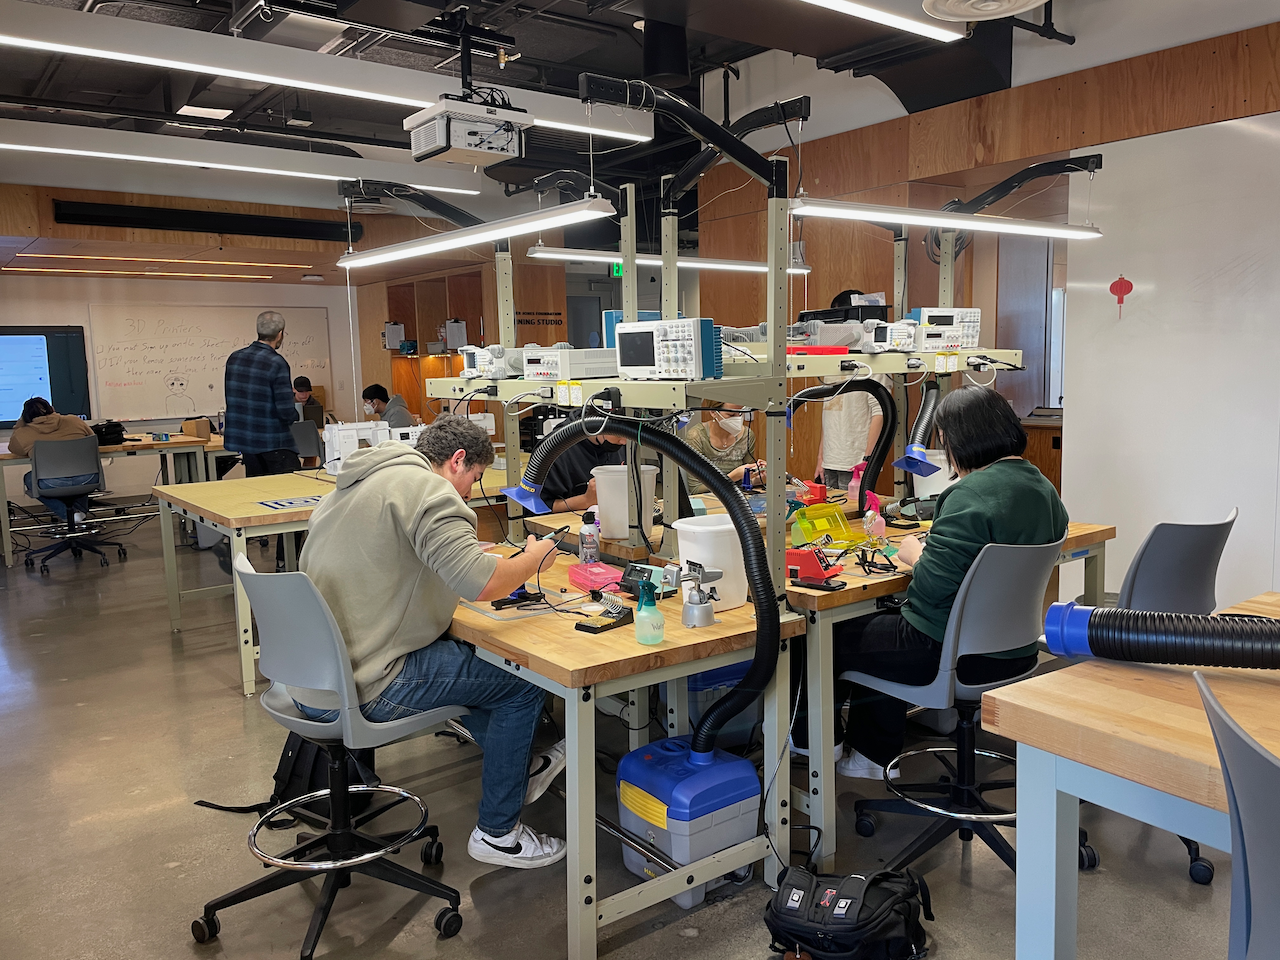 Students working at soldering benches